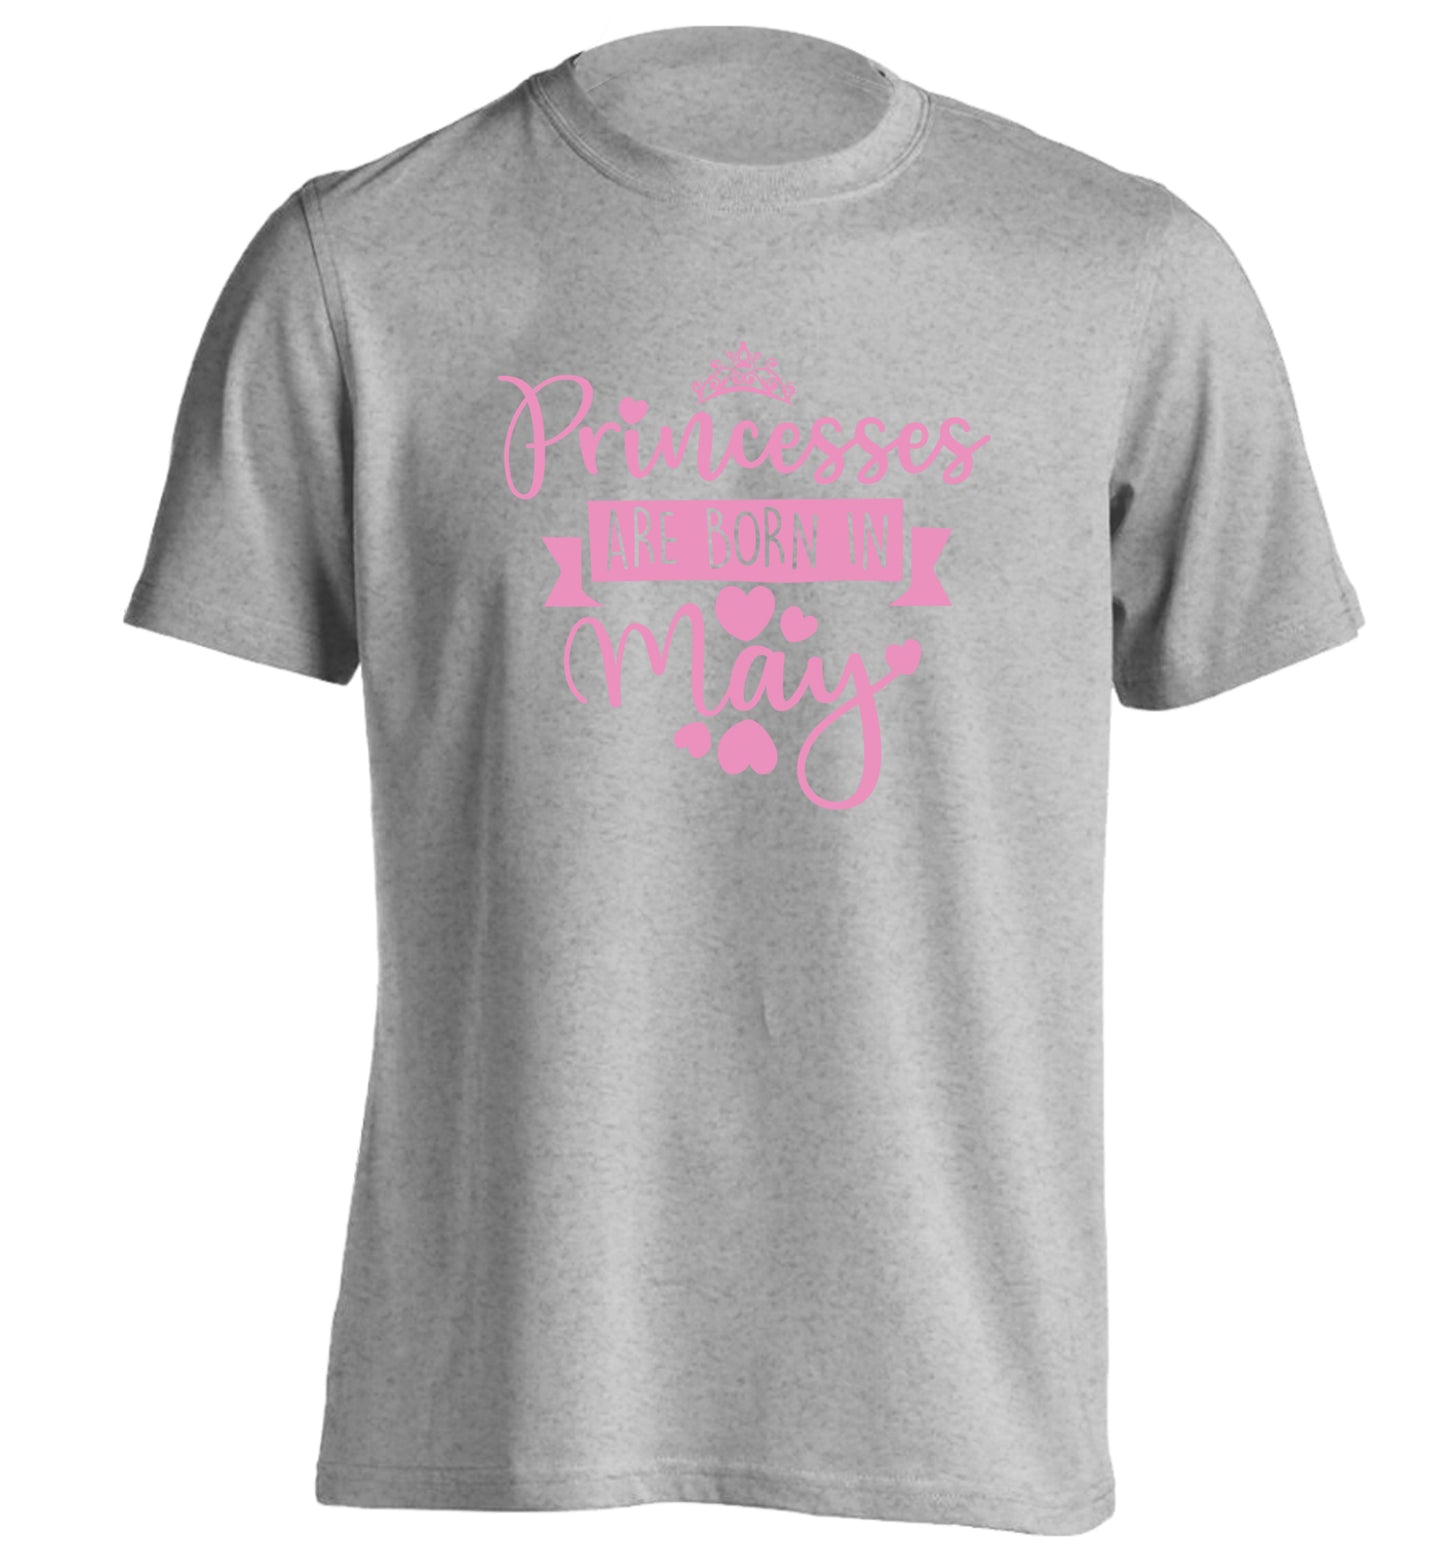 Princesses are born in May adults unisex grey Tshirt 2XL